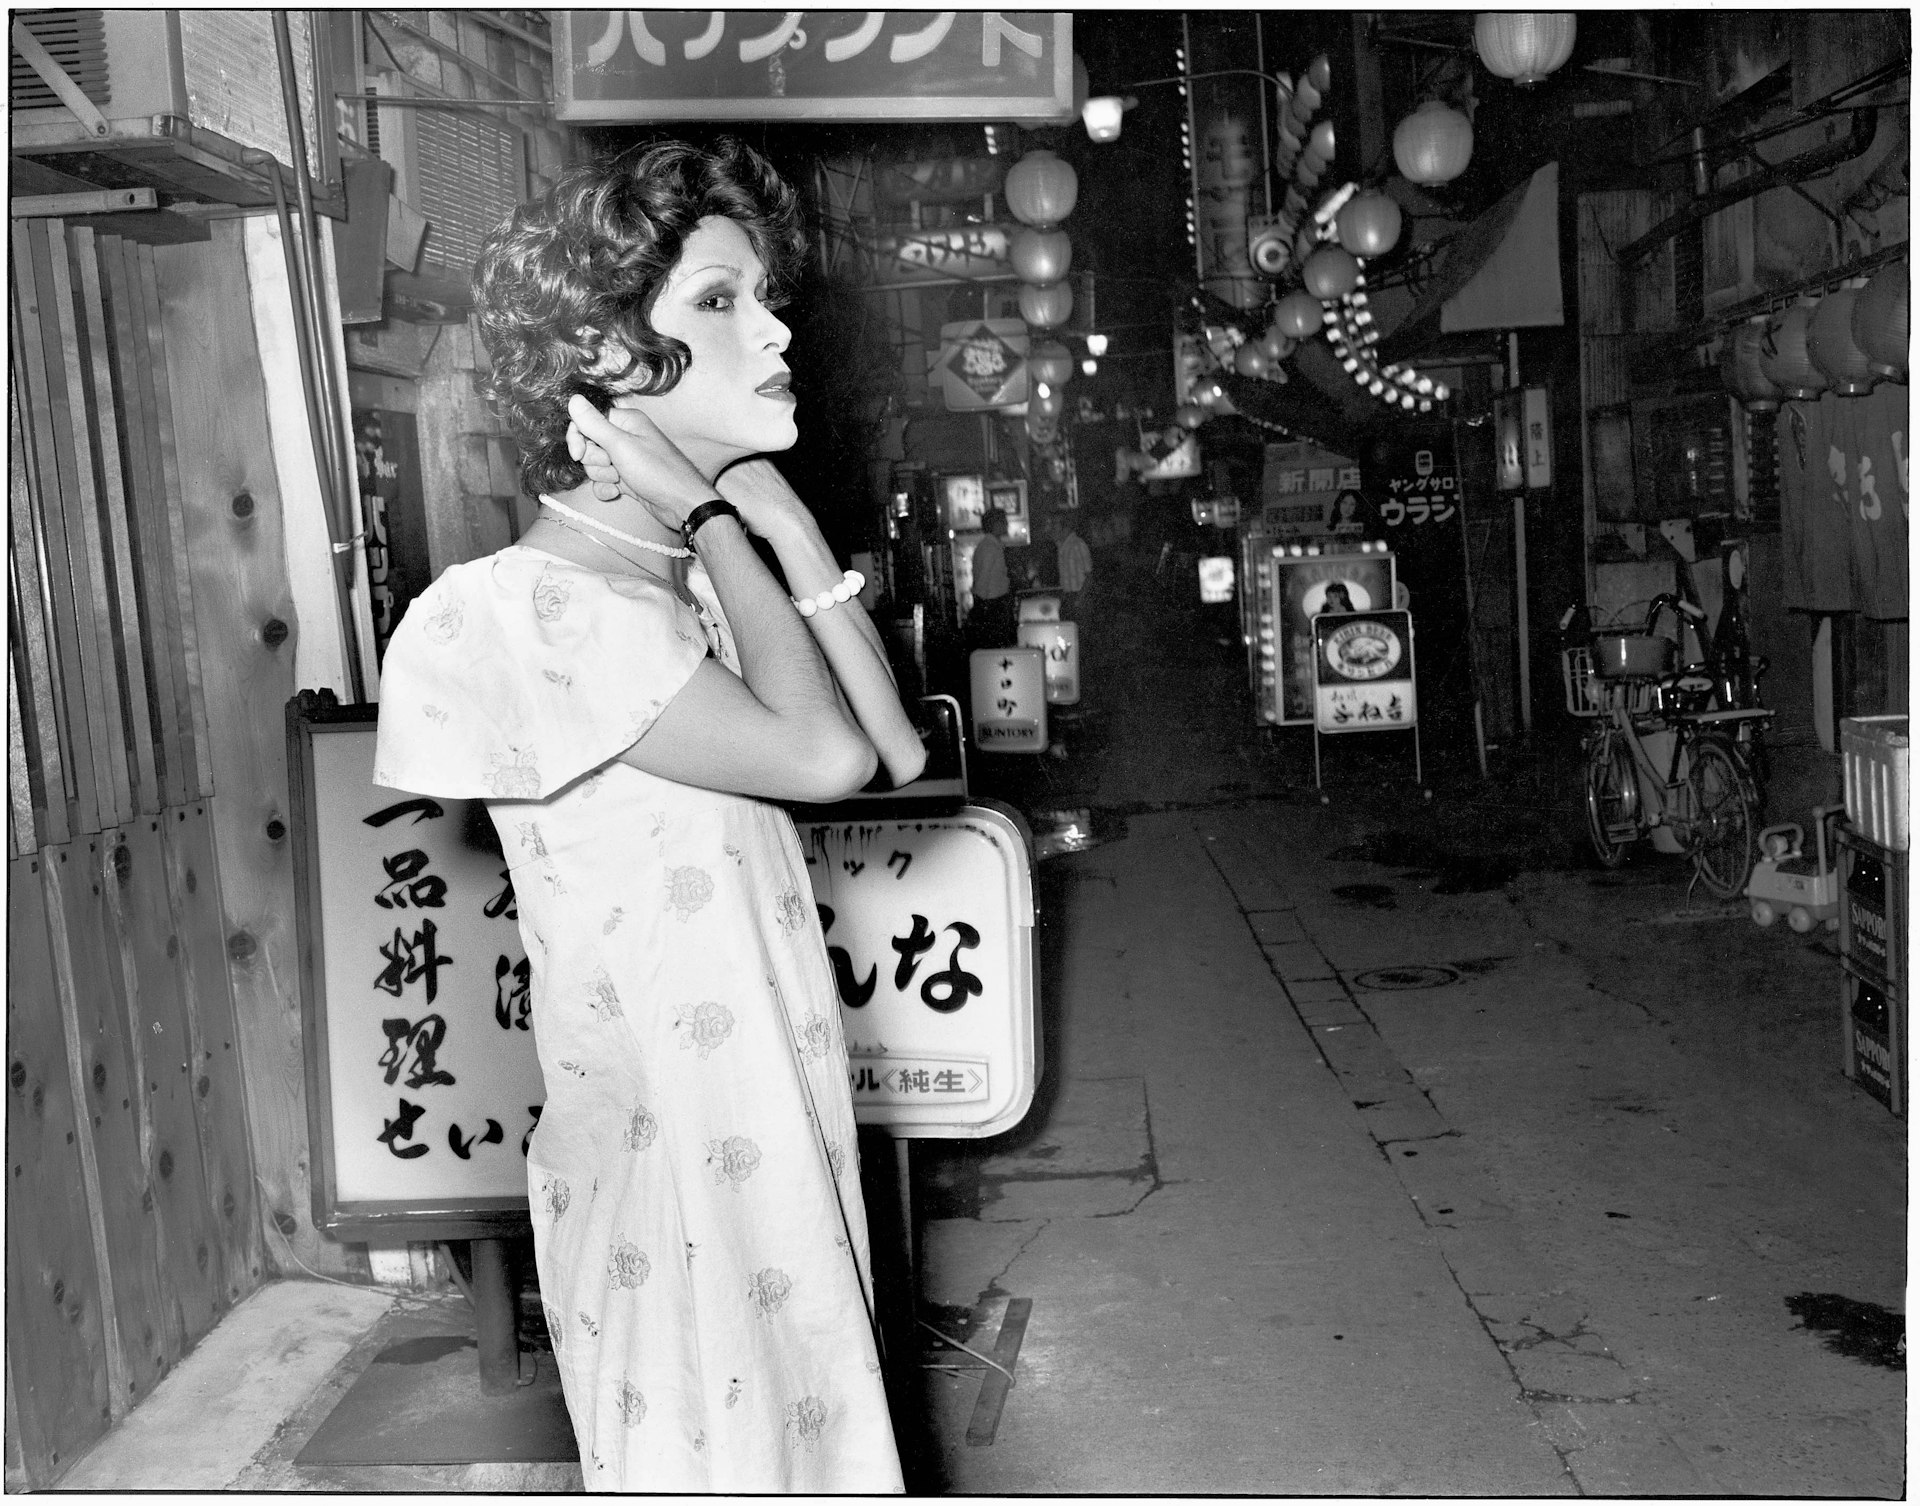 Even though there's no sign of any customers... near Ikebukuro, Hikarimachi Ohashi, 1975. From the series Flash Up, 1975 -1979 Collection of Mark Pearson, Zen Foto Gallery